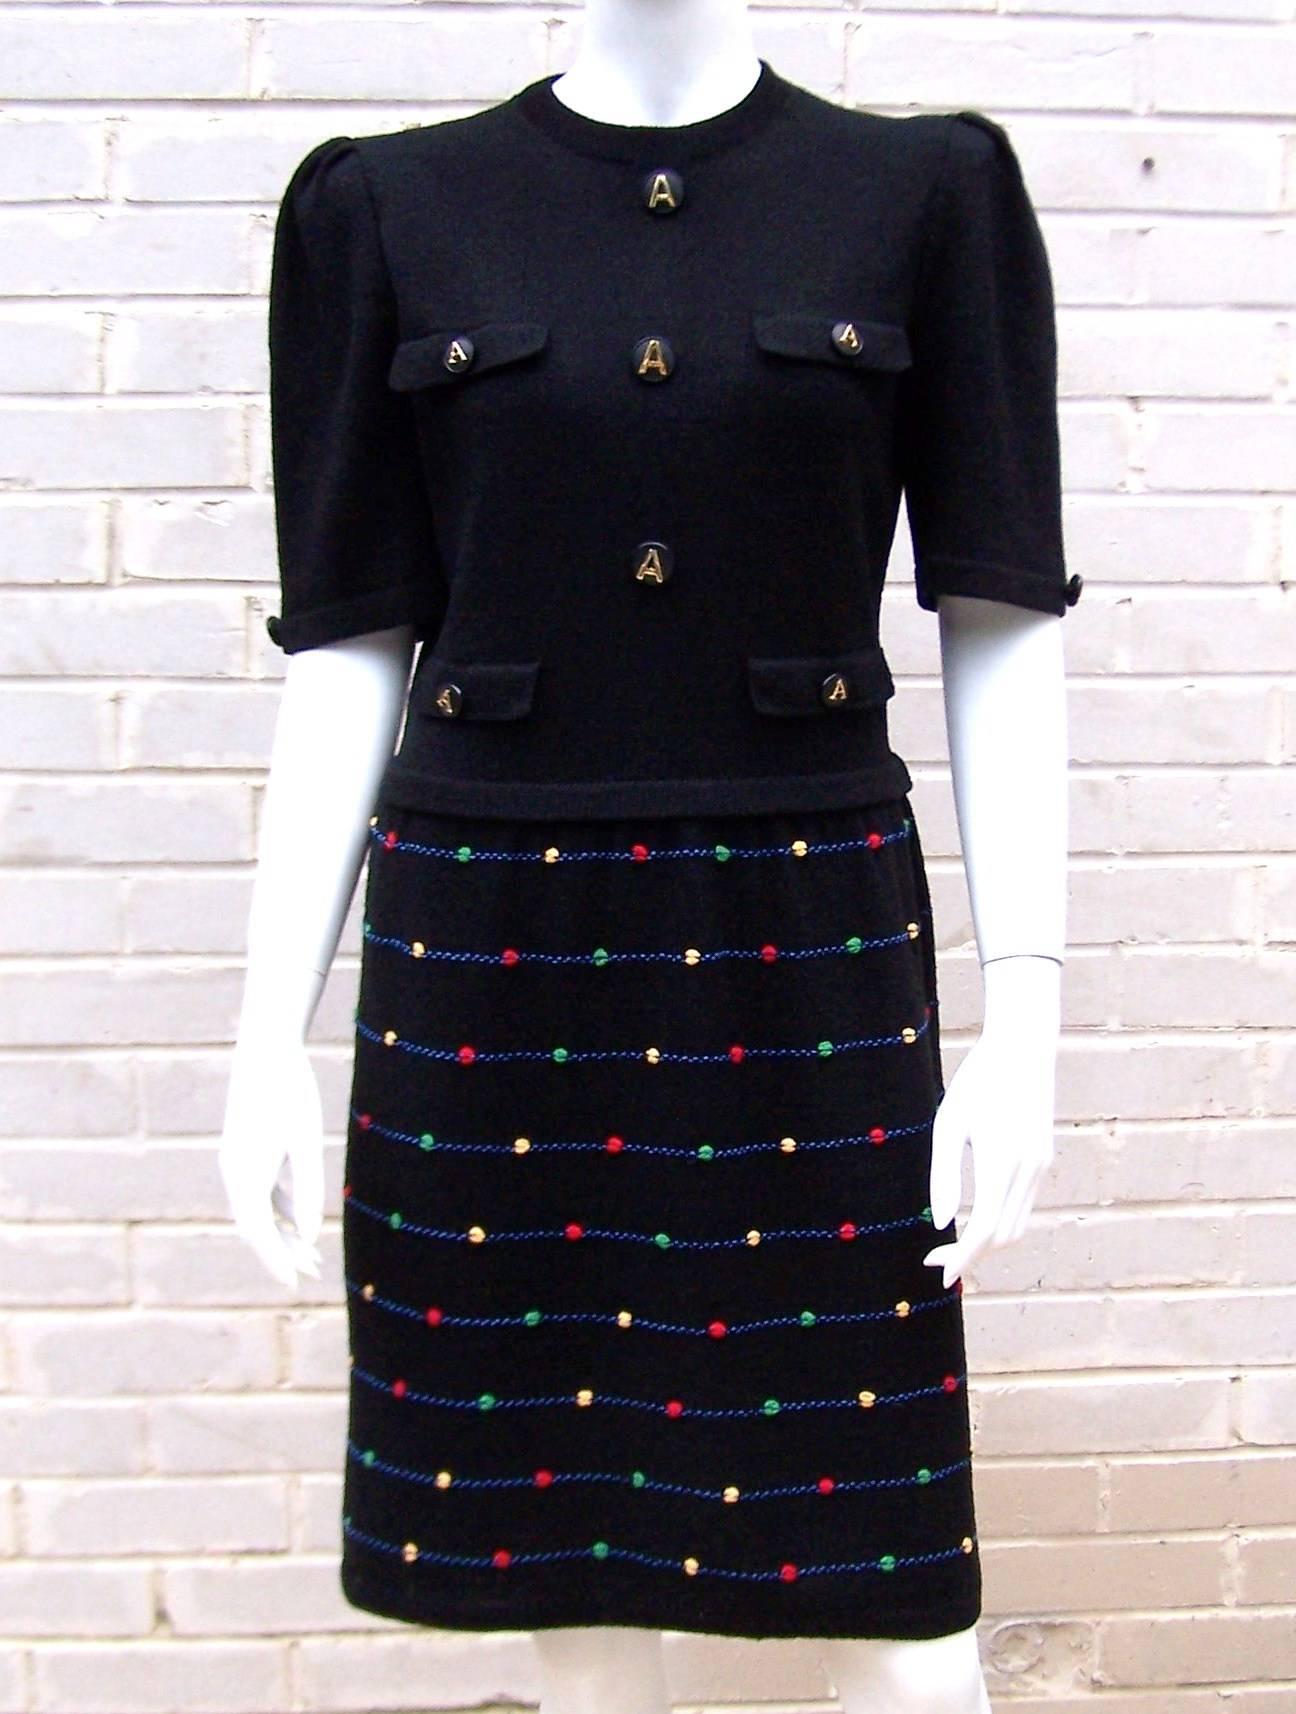 Ladylike and refined are characteristics of Adolfo clothing from 1970s-1980s.  This black cardigan dress suit fits that description with the added whimsical bonus of a colorful dot design and large logo buttons.  There is a Chanel inspiration to the